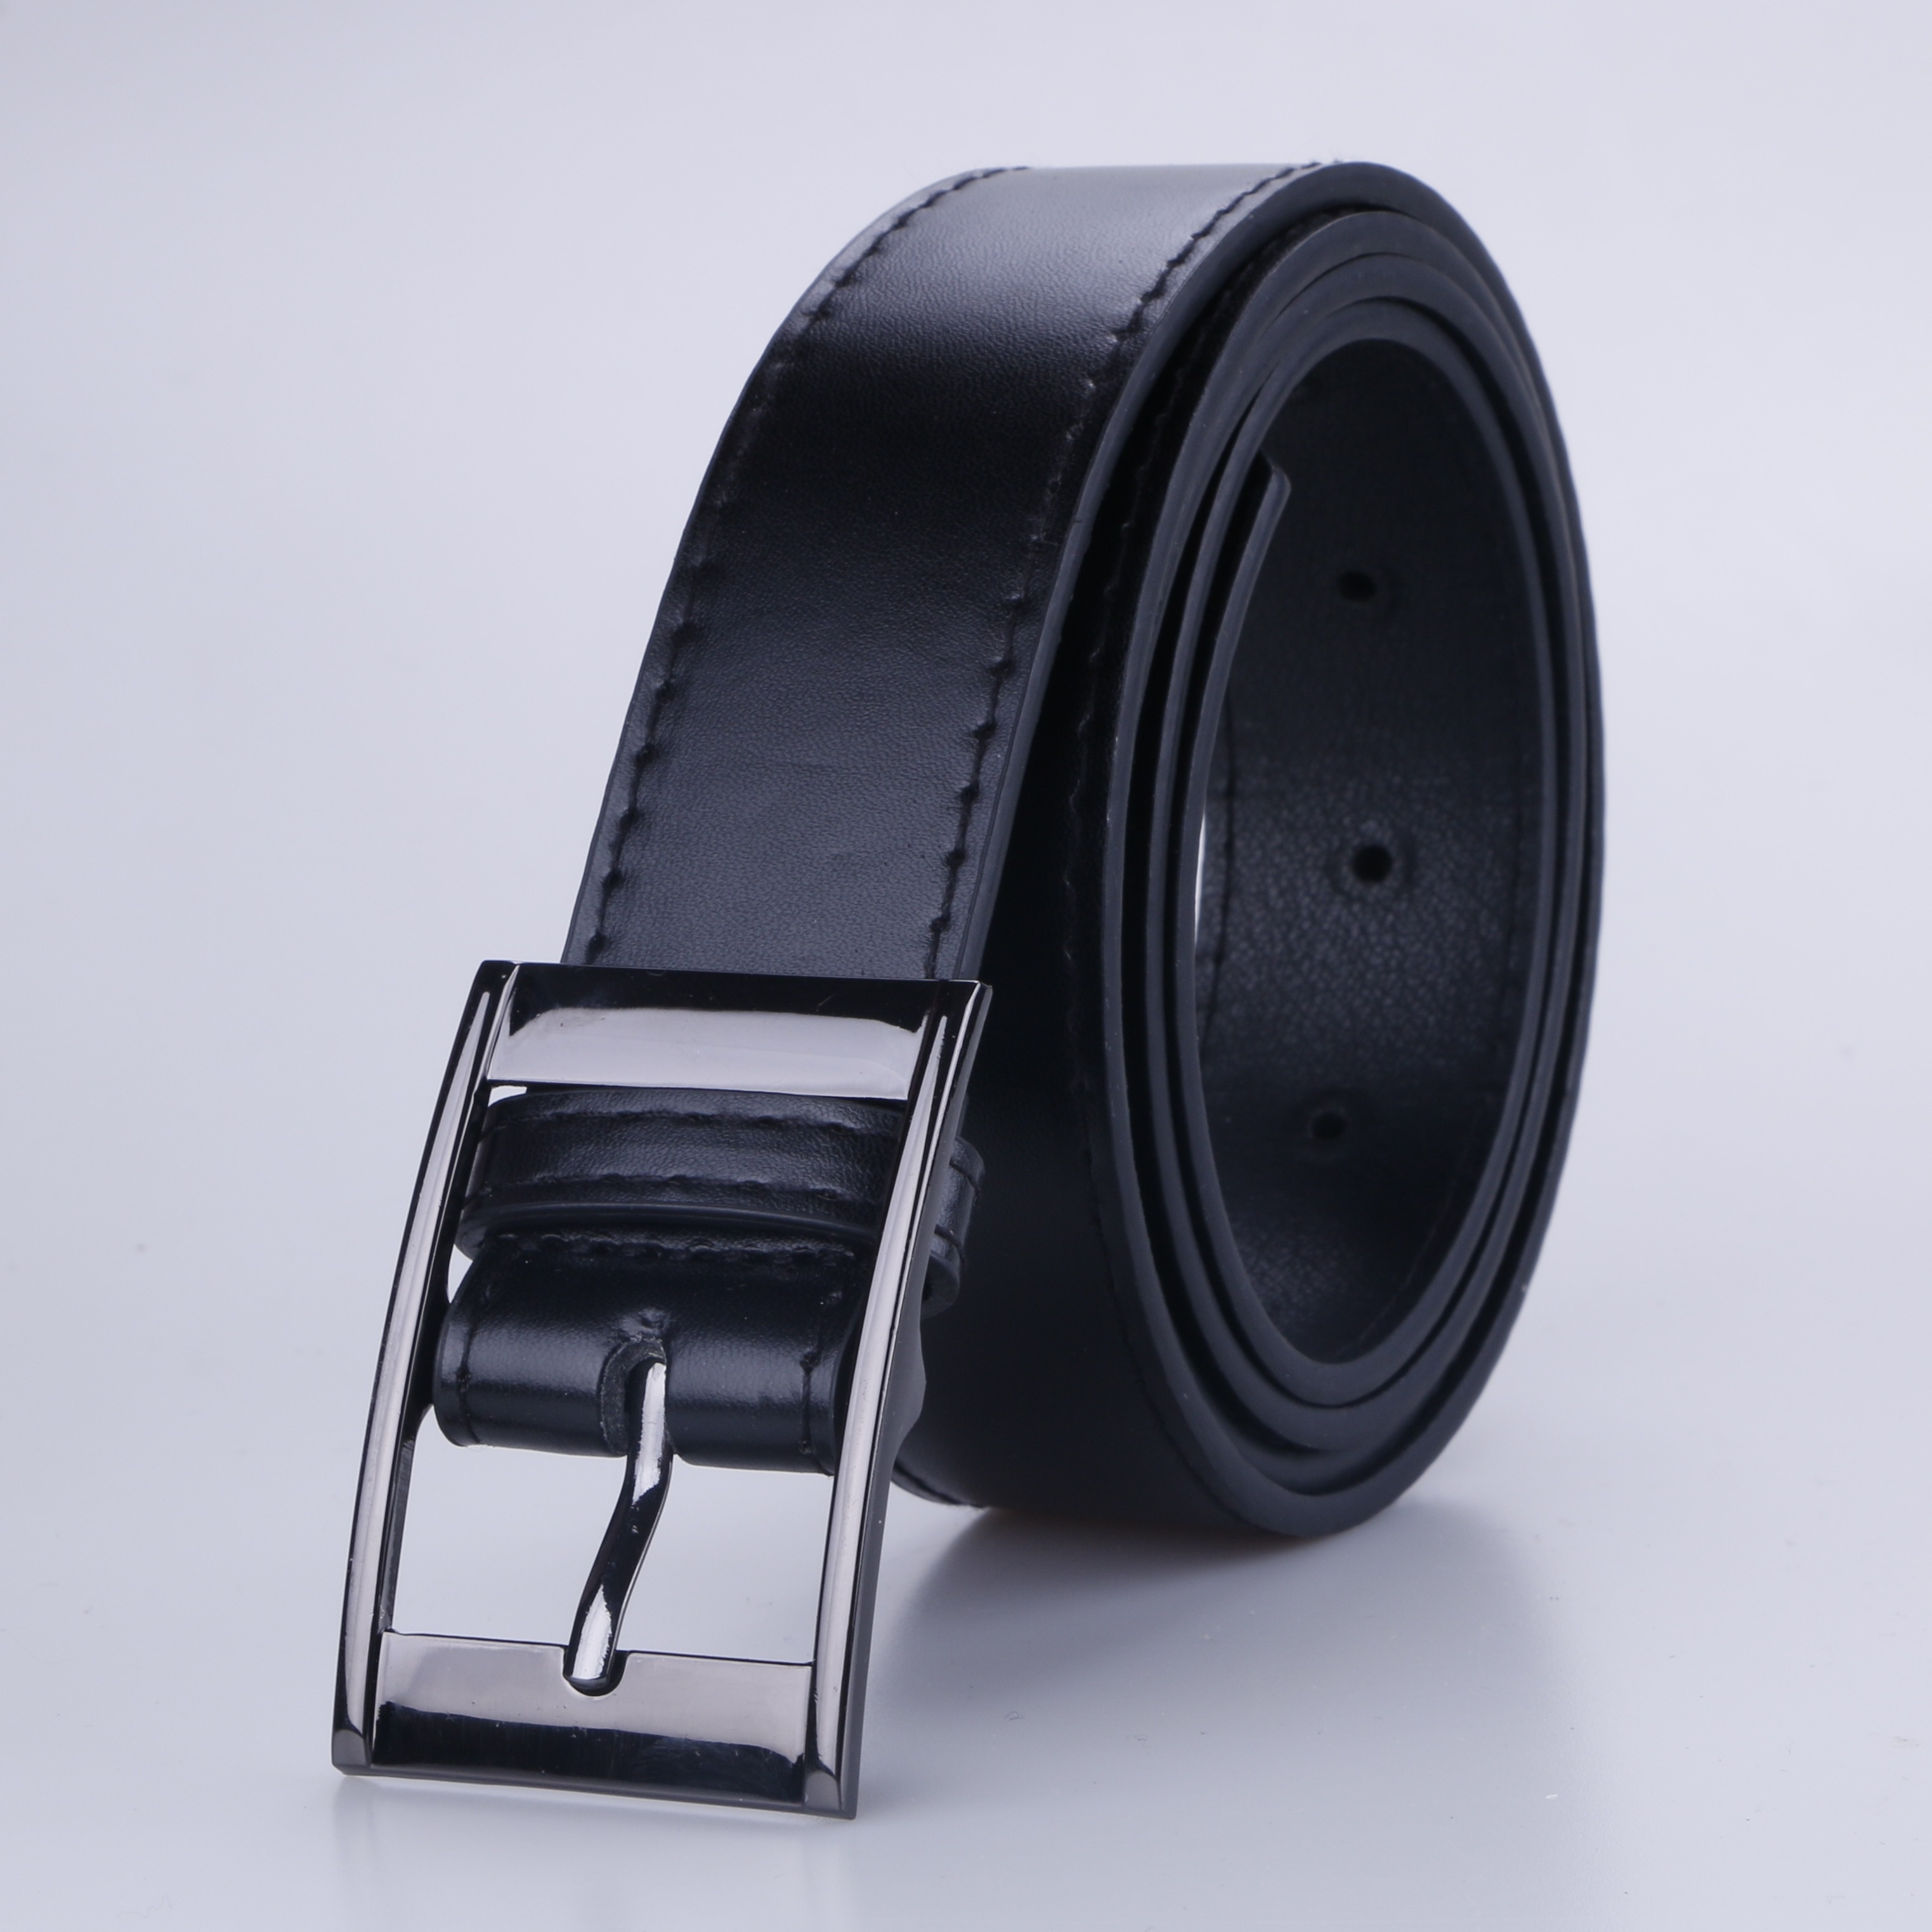 

Stylish Men's Belt With Square Pin Buckle, Perfect For Adding Style To Your Outfit, Ideal Gift